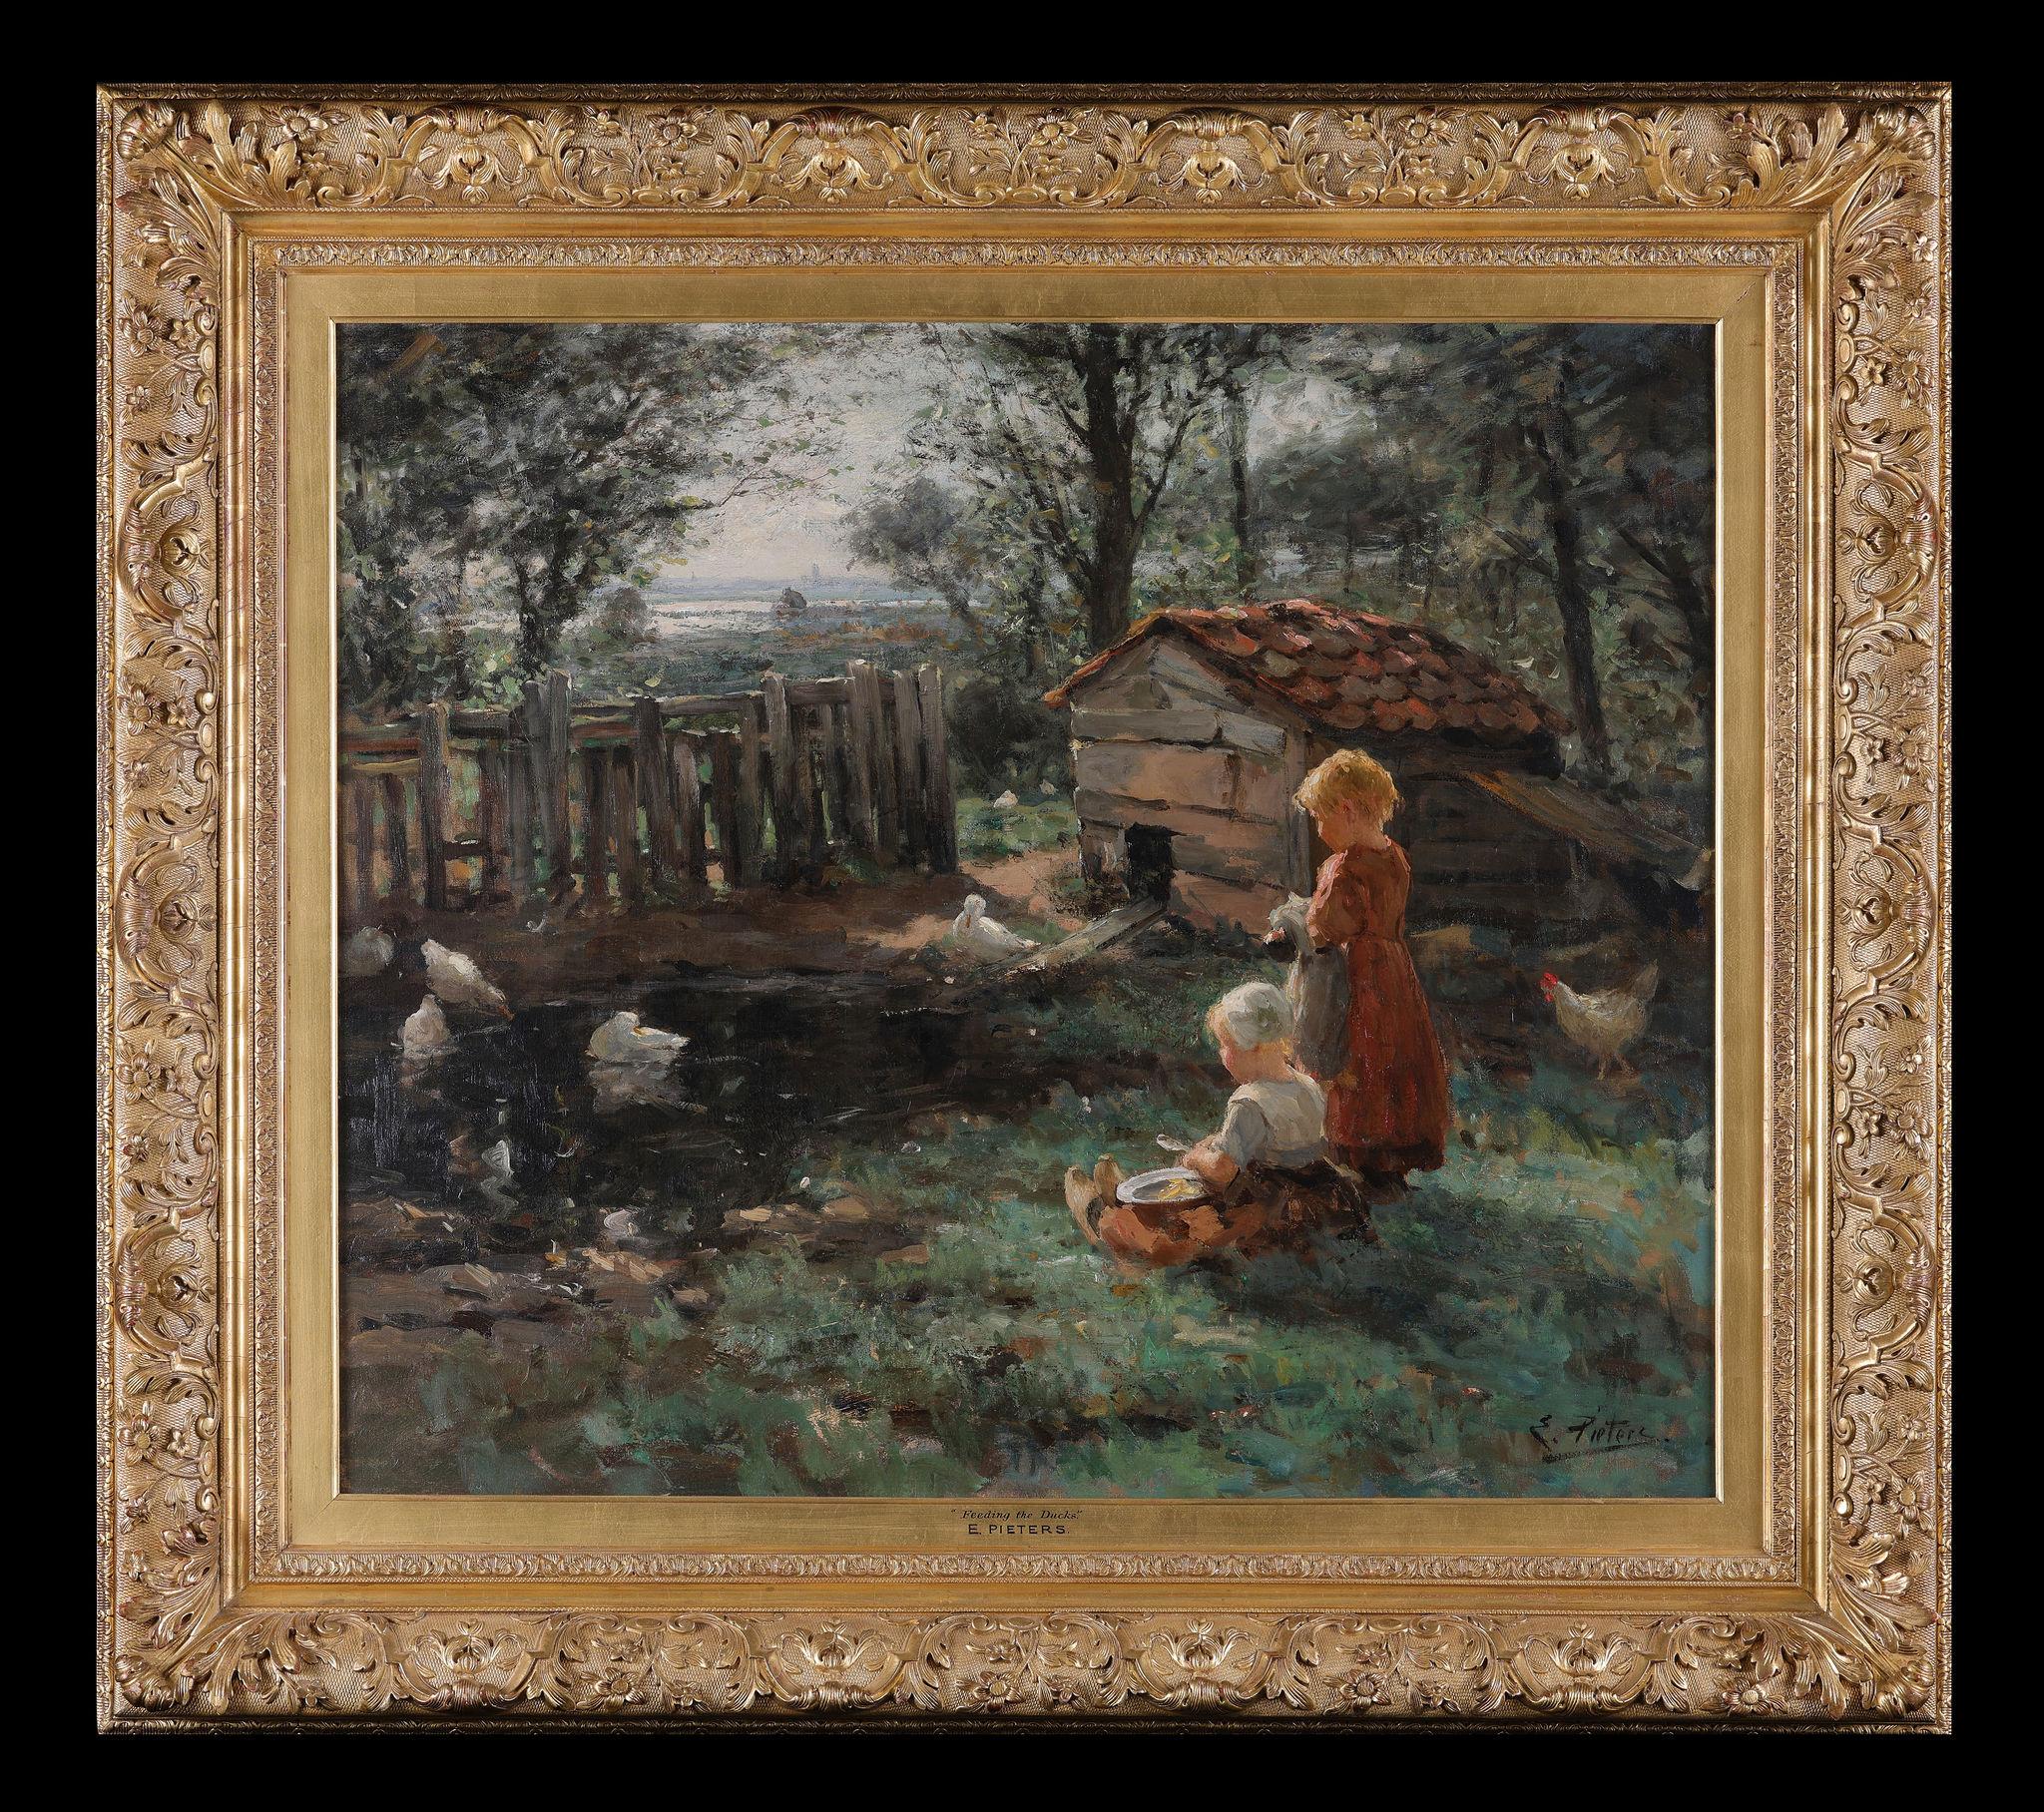 Evert Pieters Figurative Painting - 'Feeding the Ducks' an antique oil painting